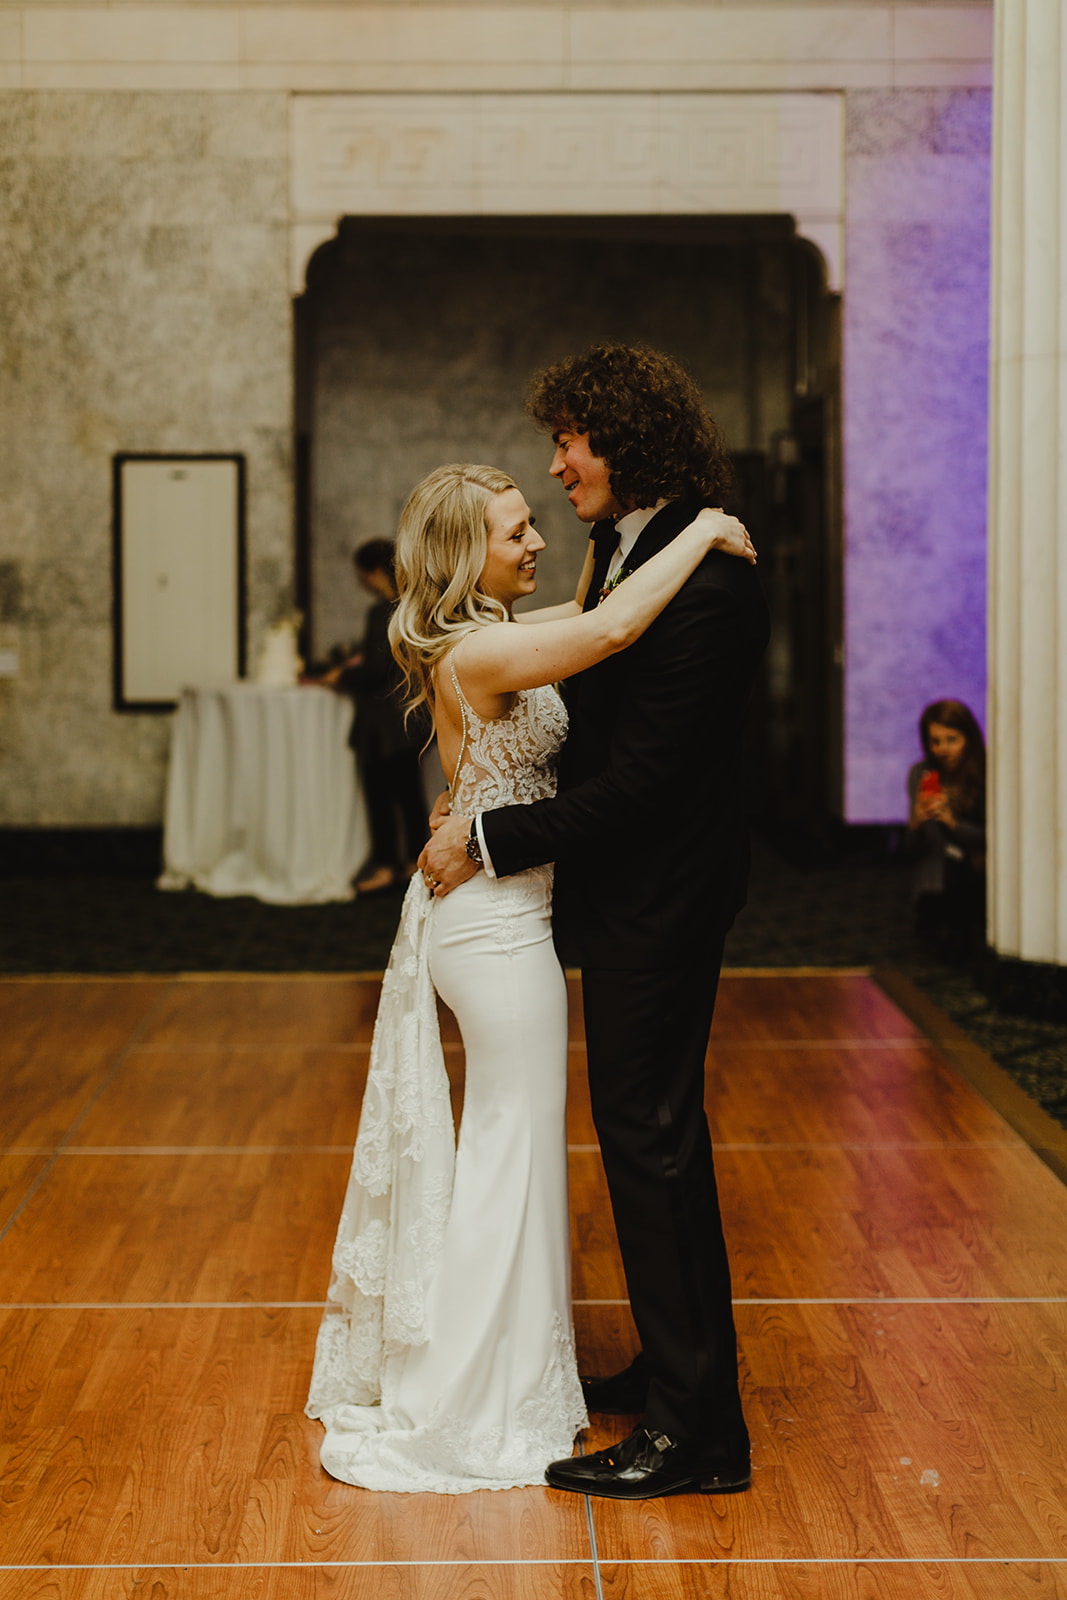 A couple smiling and dancing on their wedding day